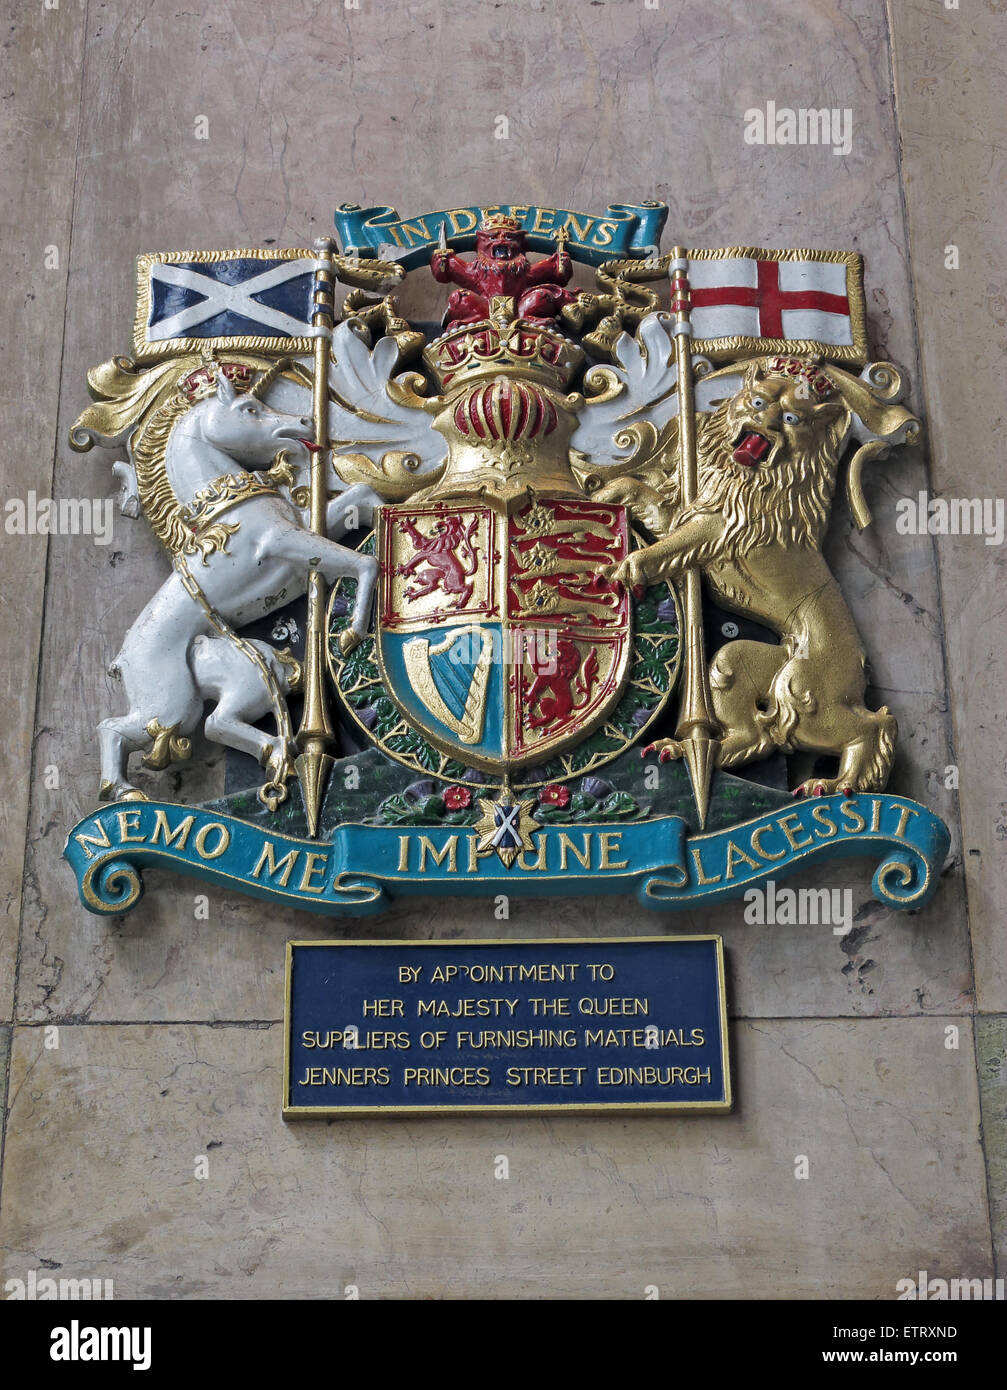 Jenners Department Store Princes St Edinburgh Scotland UK - Crest by royal appointment Stock Photo